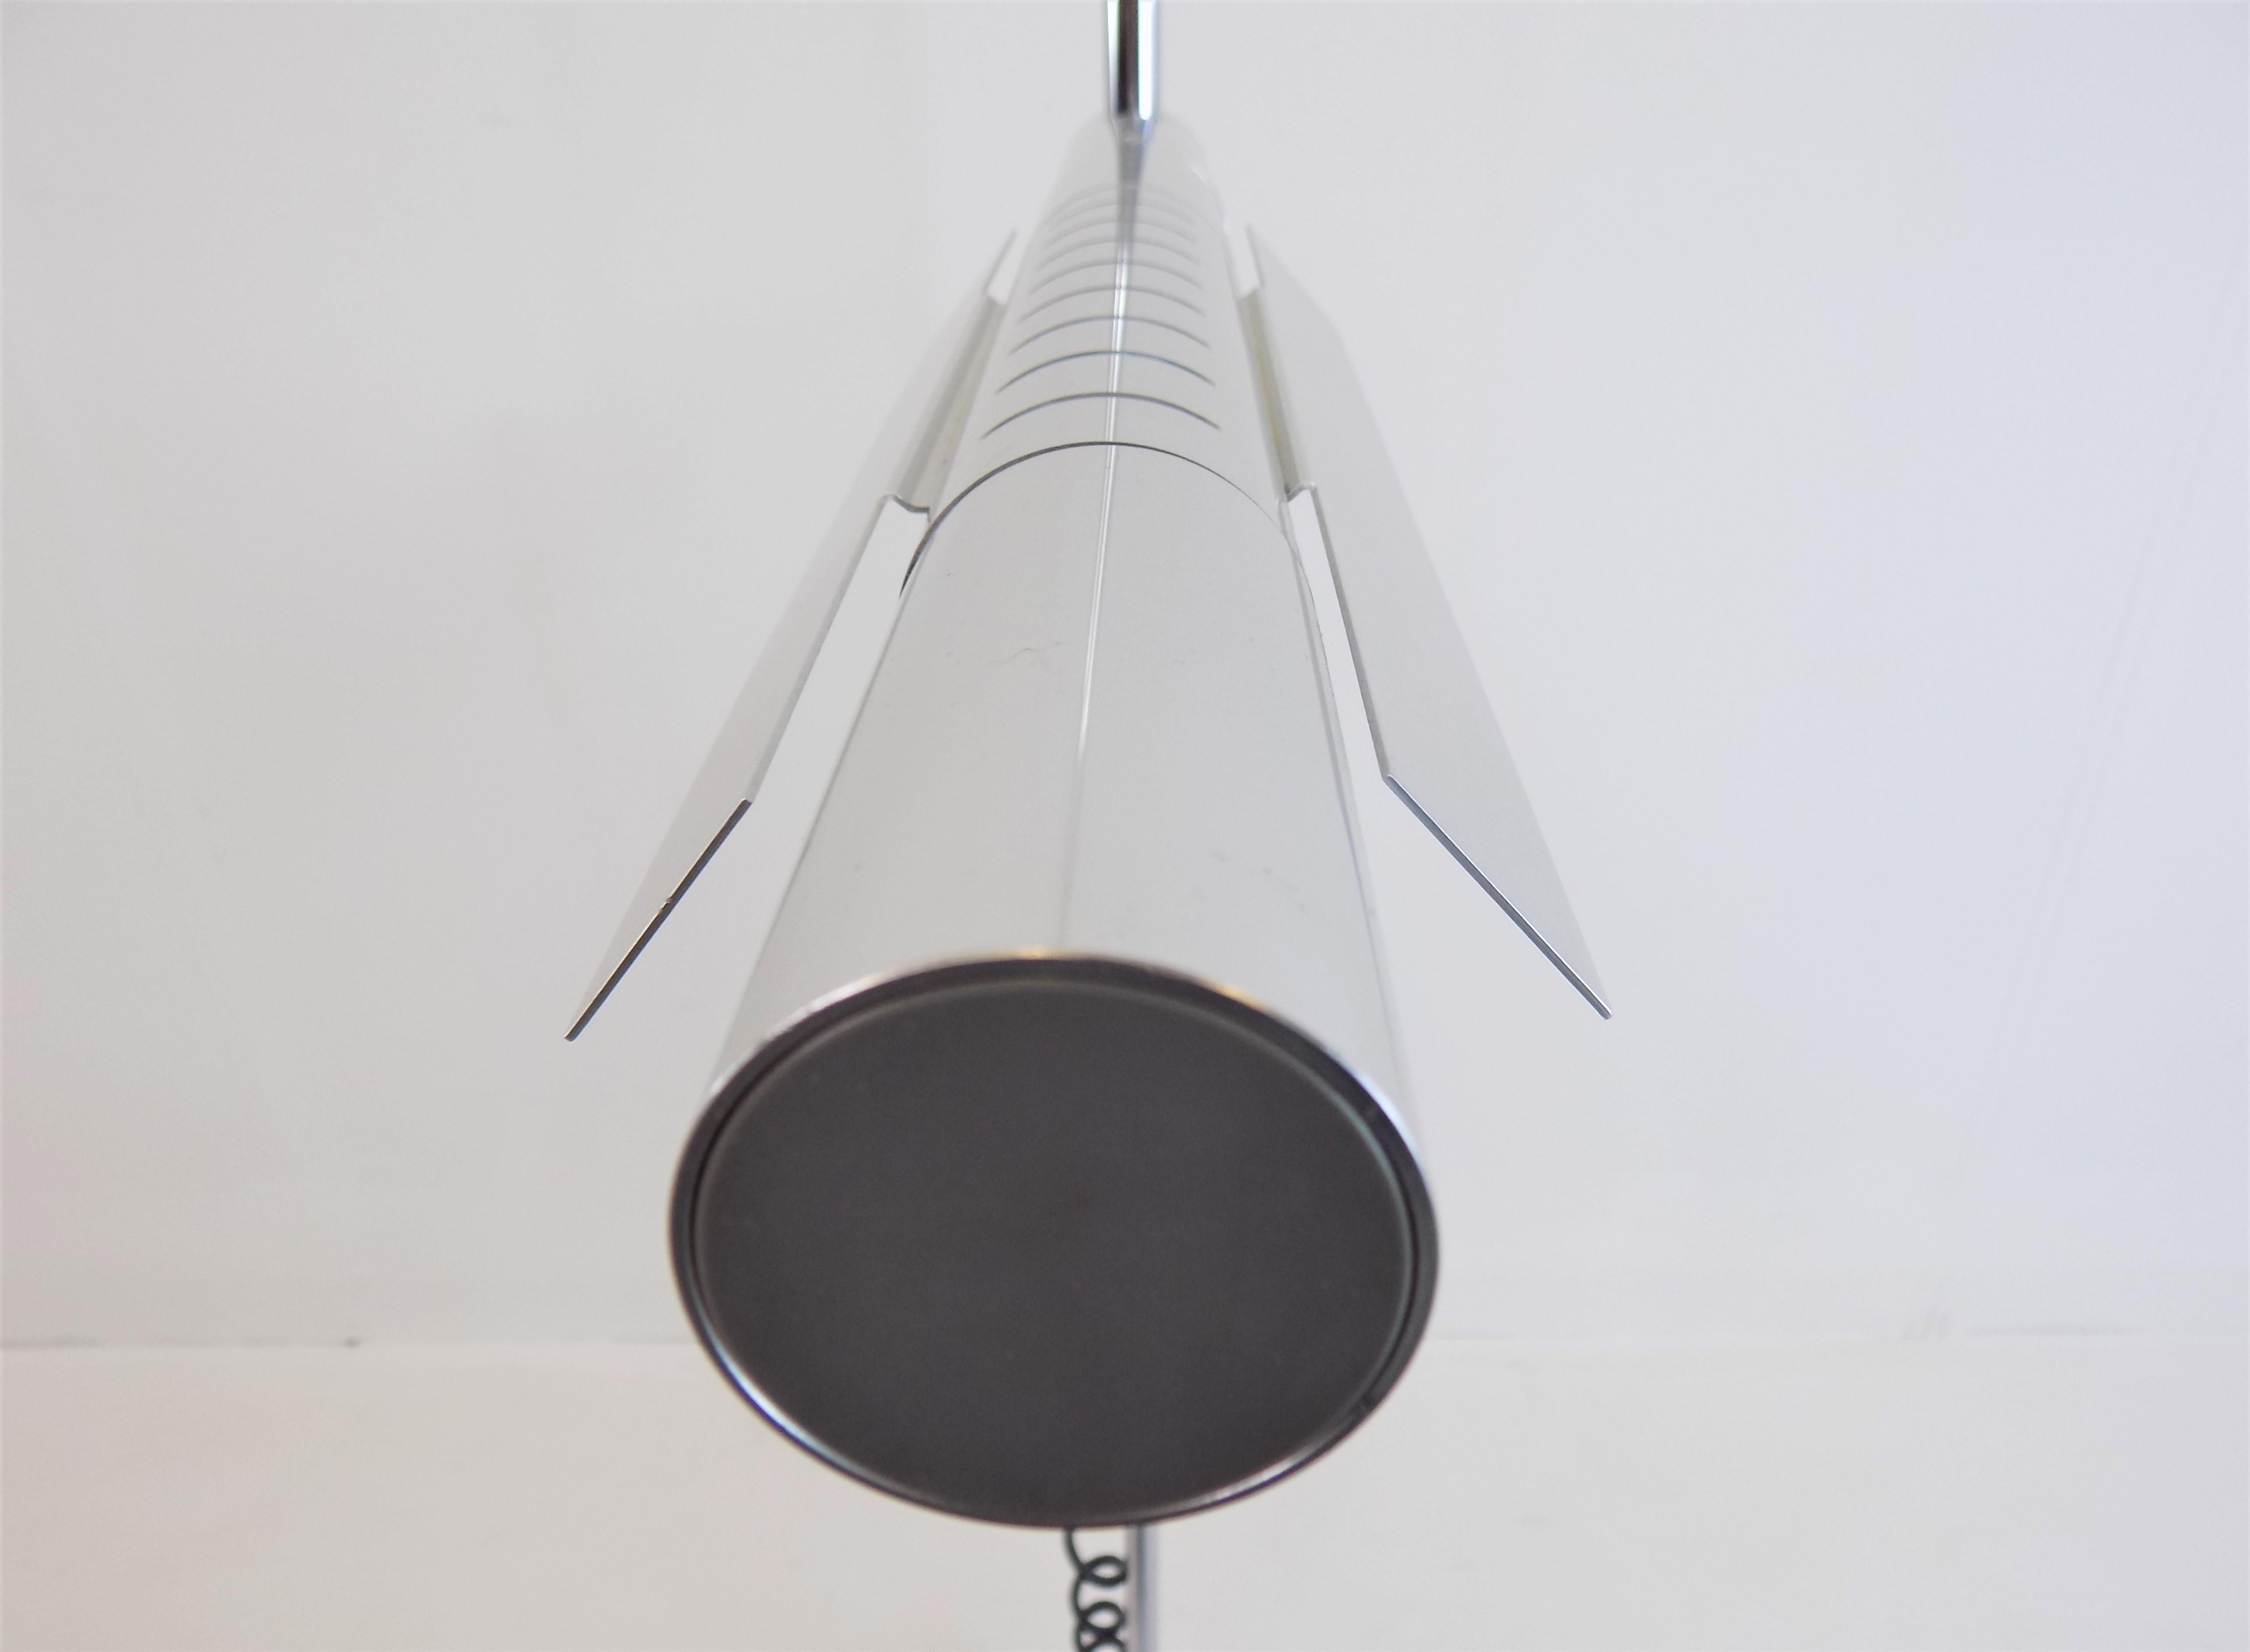 Swisslamps International Halo 250 Floor Lamp by R. and R. Baltensweiler For Sale 5